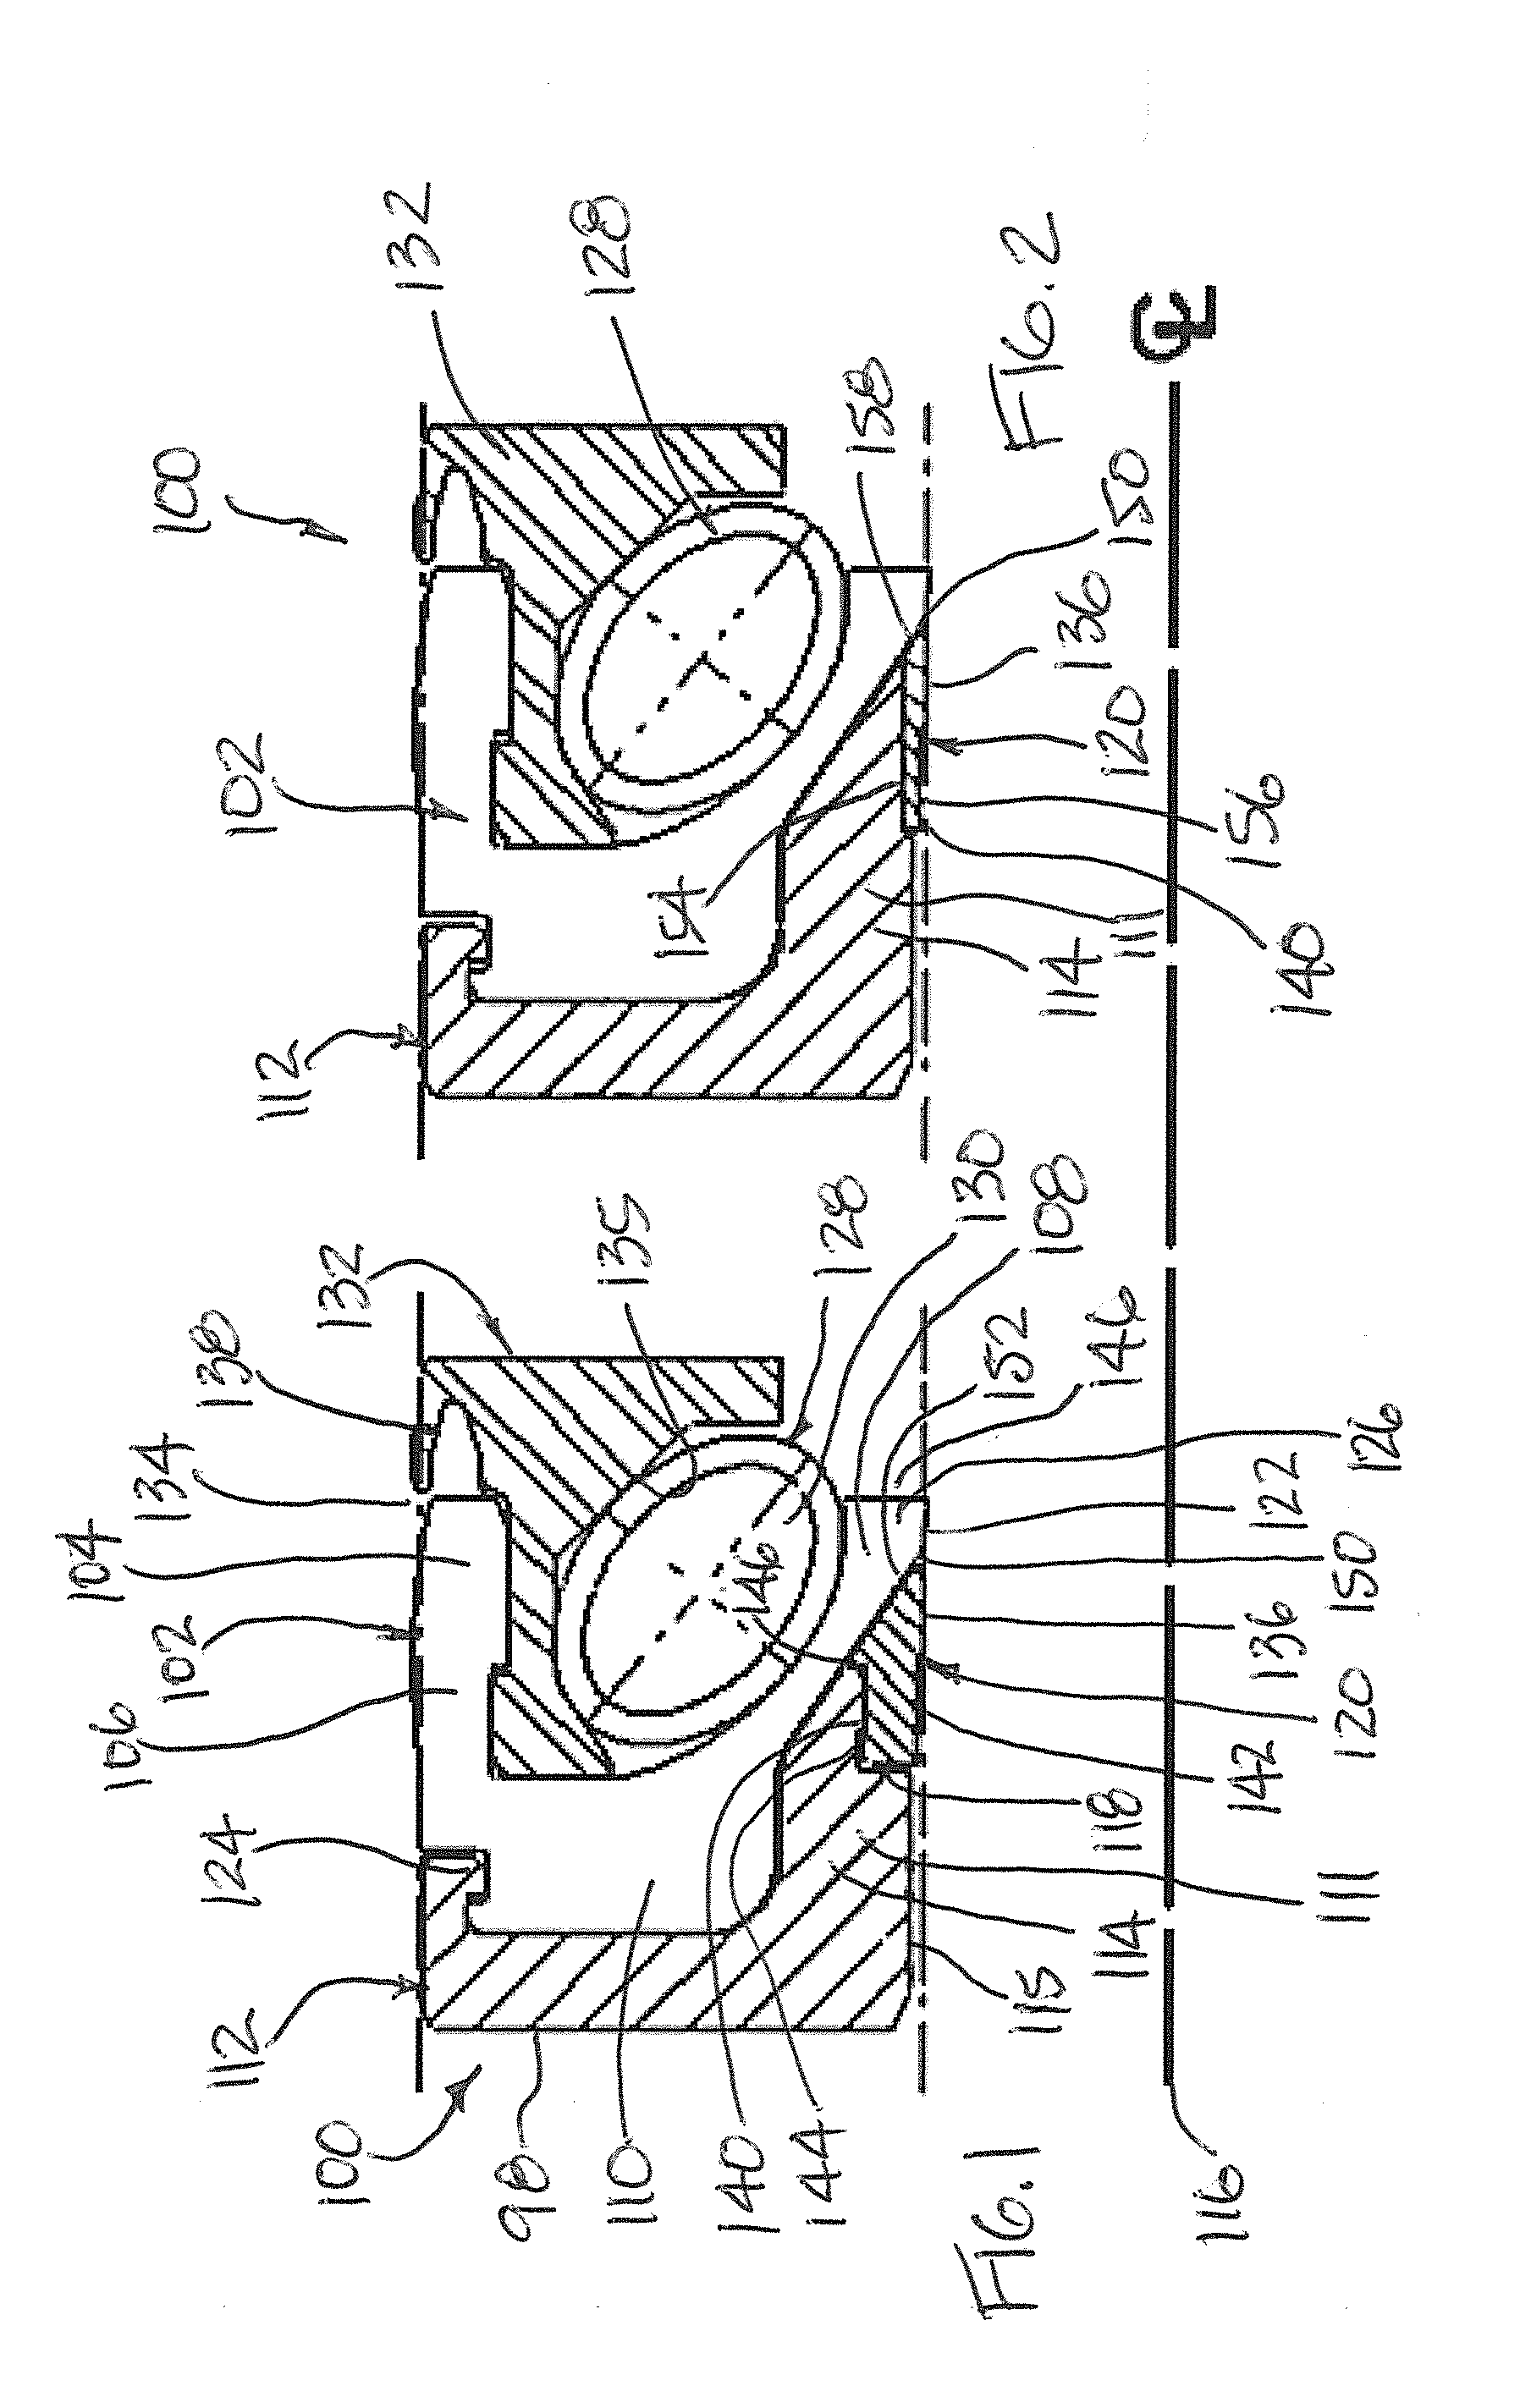 High pressure lip seals with Anti-extrusion and Anti-galling properties and related methods